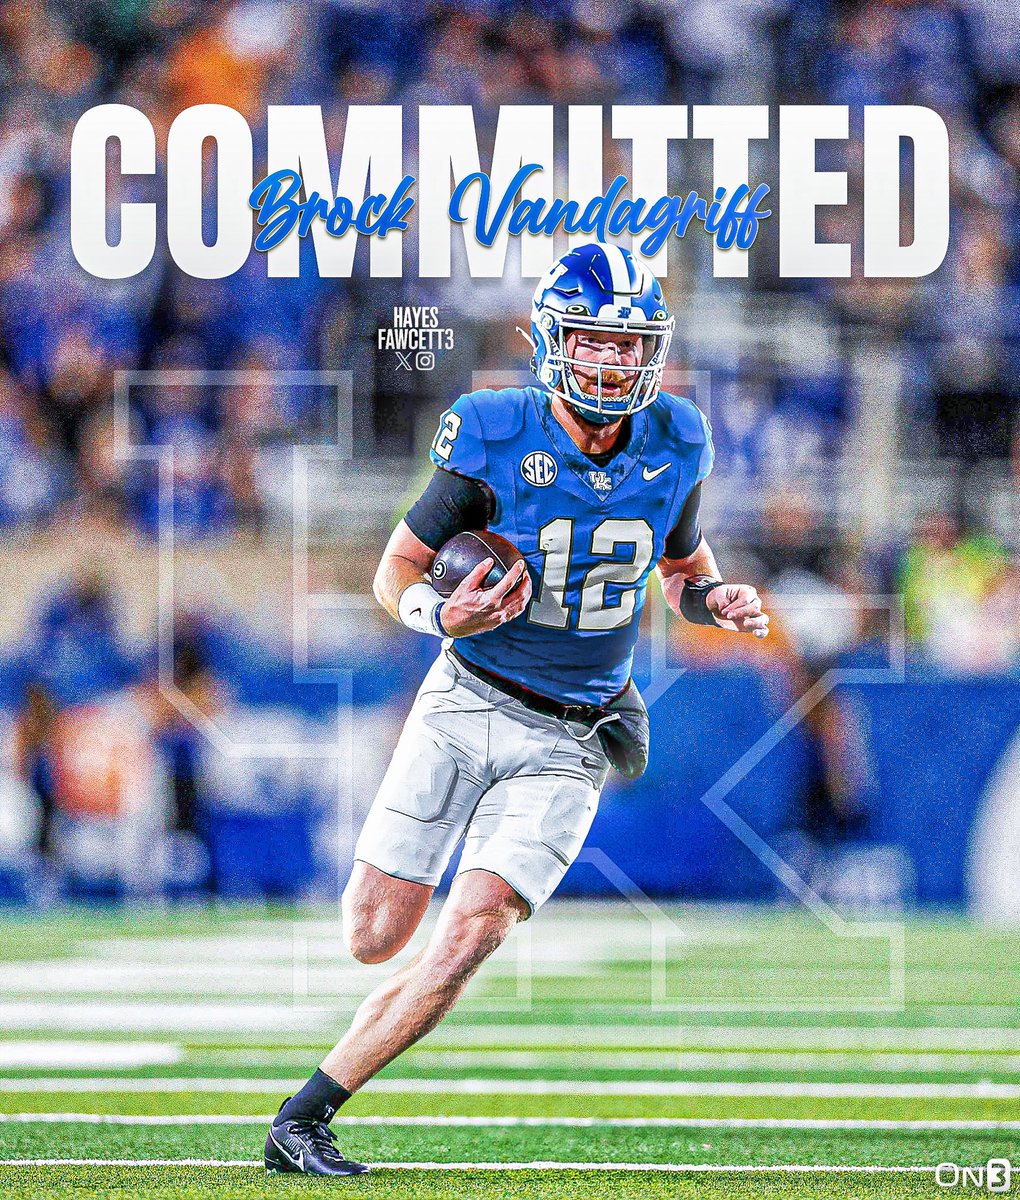 BREAKING: Former Georgia QB Brock Vandagriff has Committed to Kentucky, he tells @on3sports The 6’3 216 QB was ranked as a 5-Star in the ‘21 Class 👀 Will have 2 years of eligibility remaining on3.com/college/kentuc…